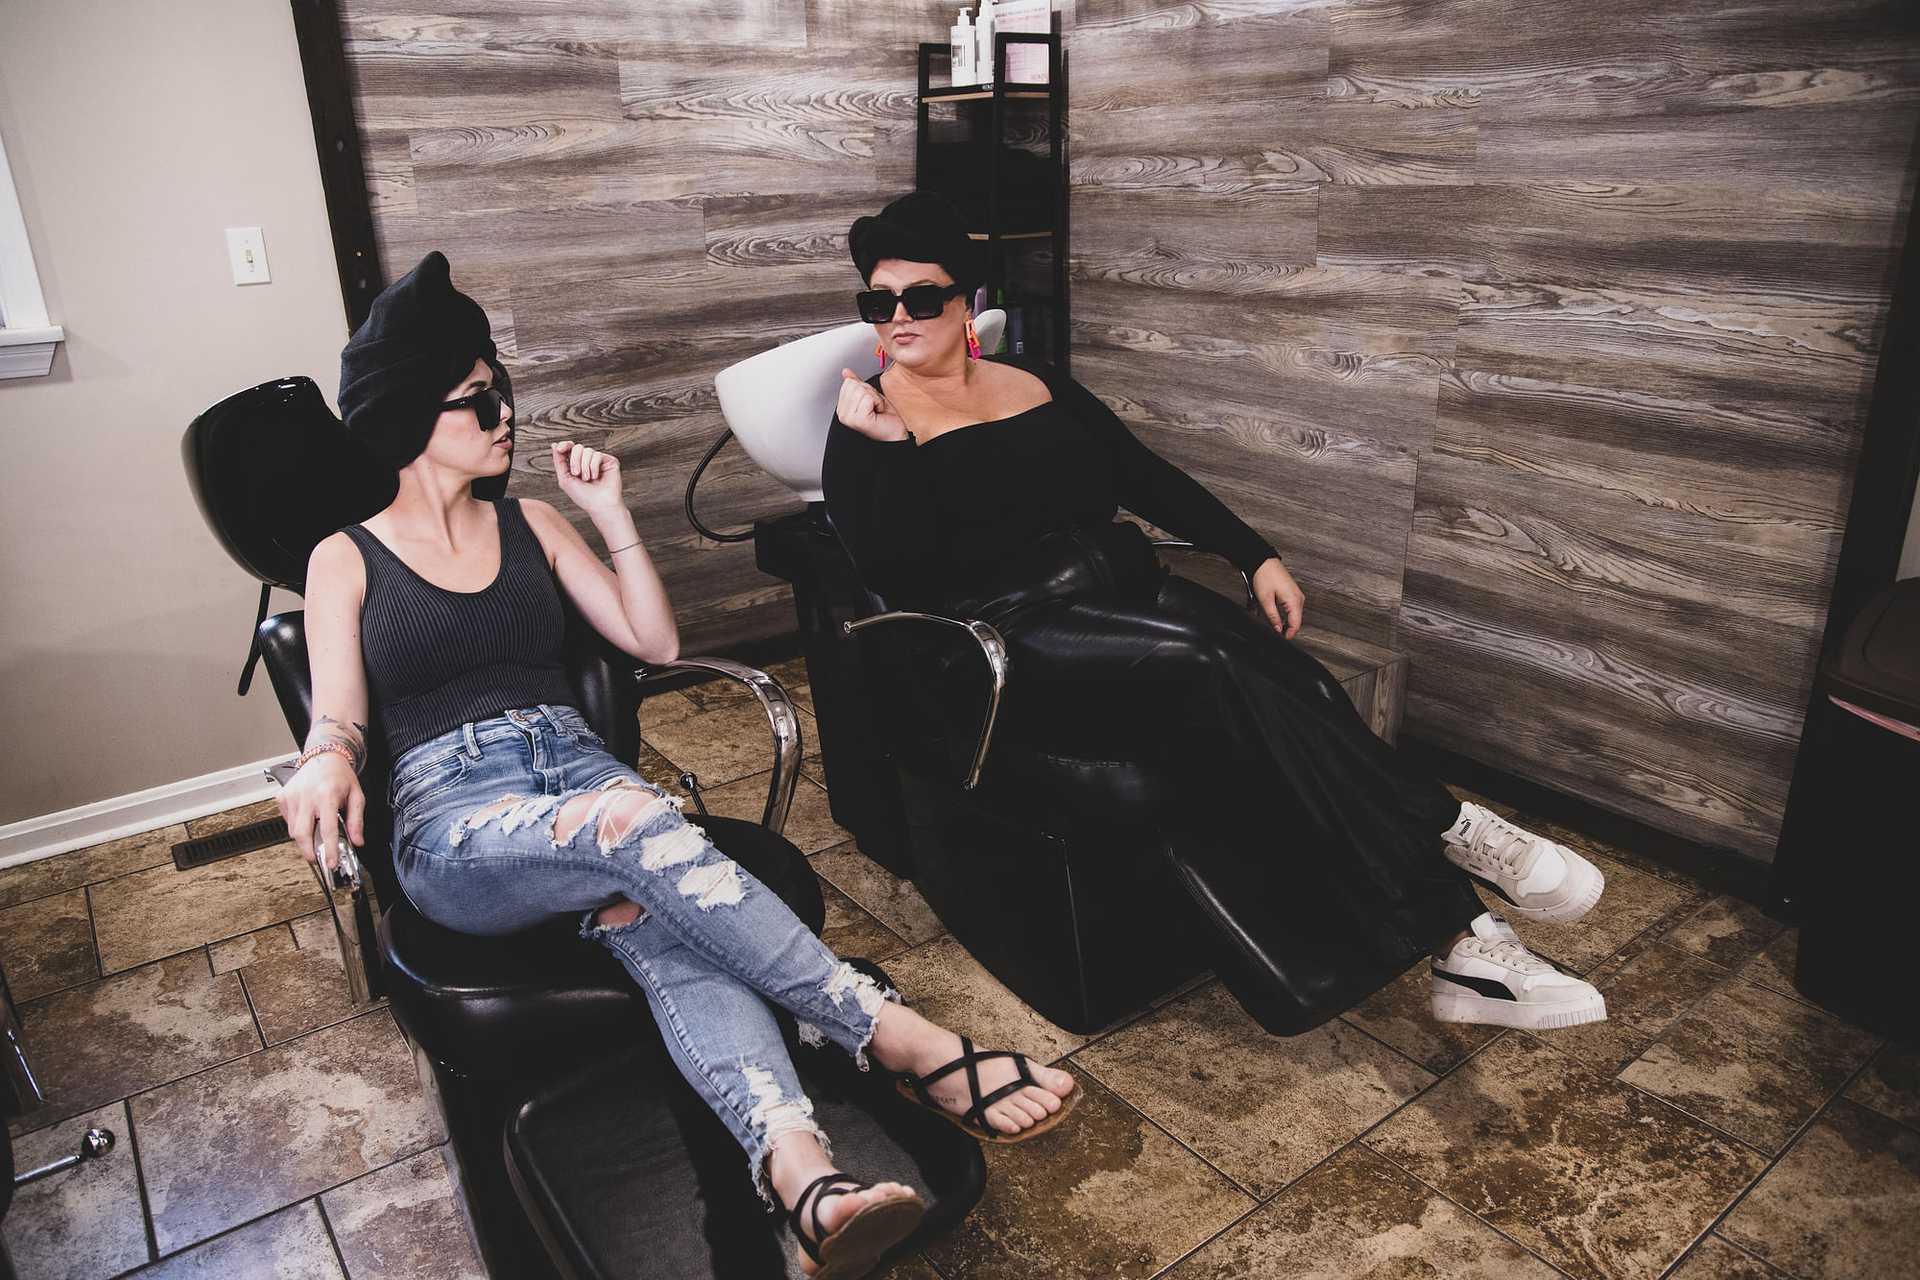 Two women relax in salon chairs, chatting and wearing black outfits and sunglasses.